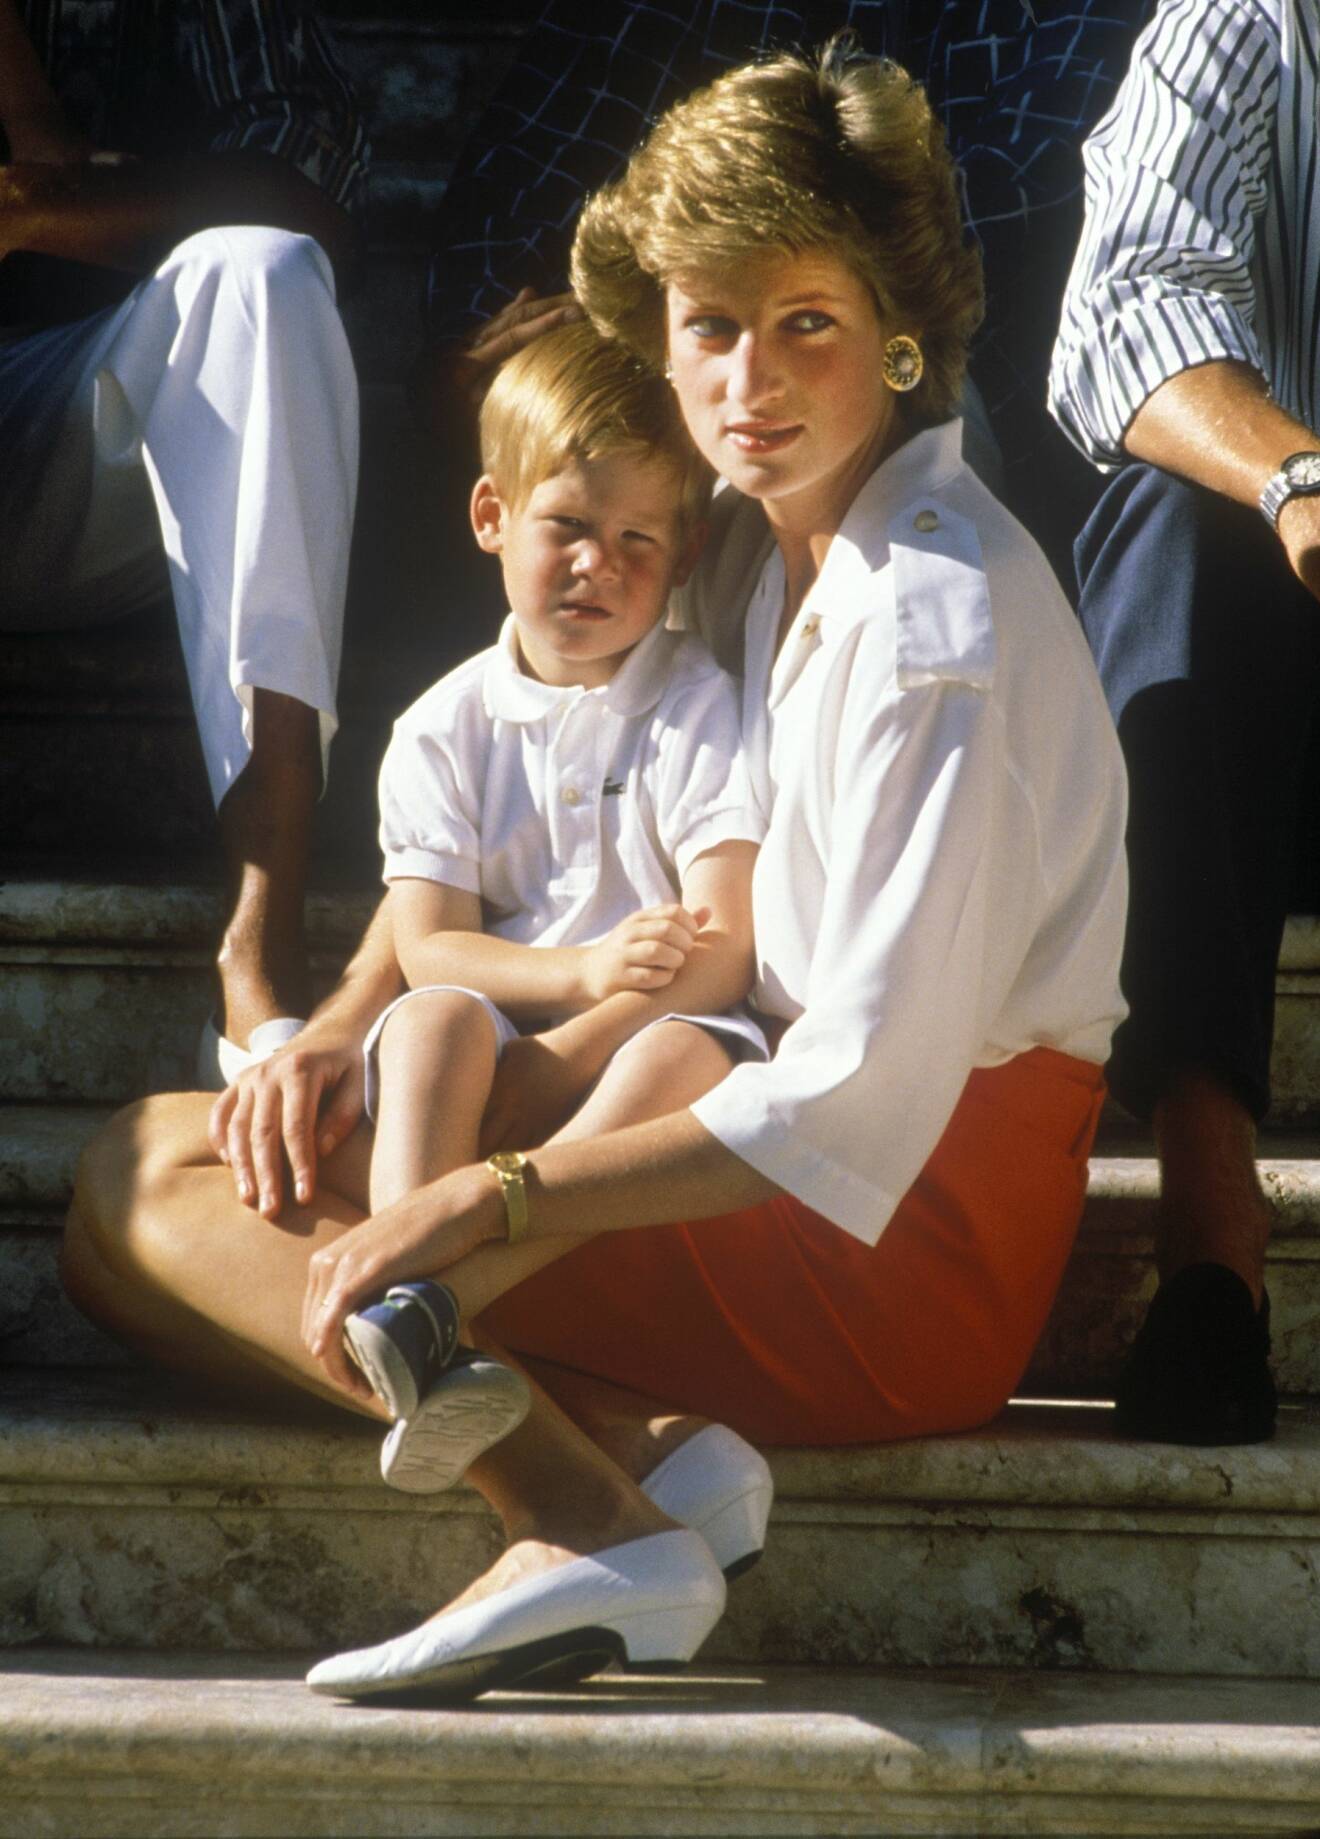 Charles, Prince of Wales, and Diana, Princess of Wales, on holiday in Majorca, Spain, with their sons Prince William and Prince Harry. They are guests of King Juan Carlos of Spain and his wife Queen Sofia. They are staying at their holiday home, the Marivent Palace, which is situated just outside the capital city of Palma. COPYRIGHT STELLA PICTURES